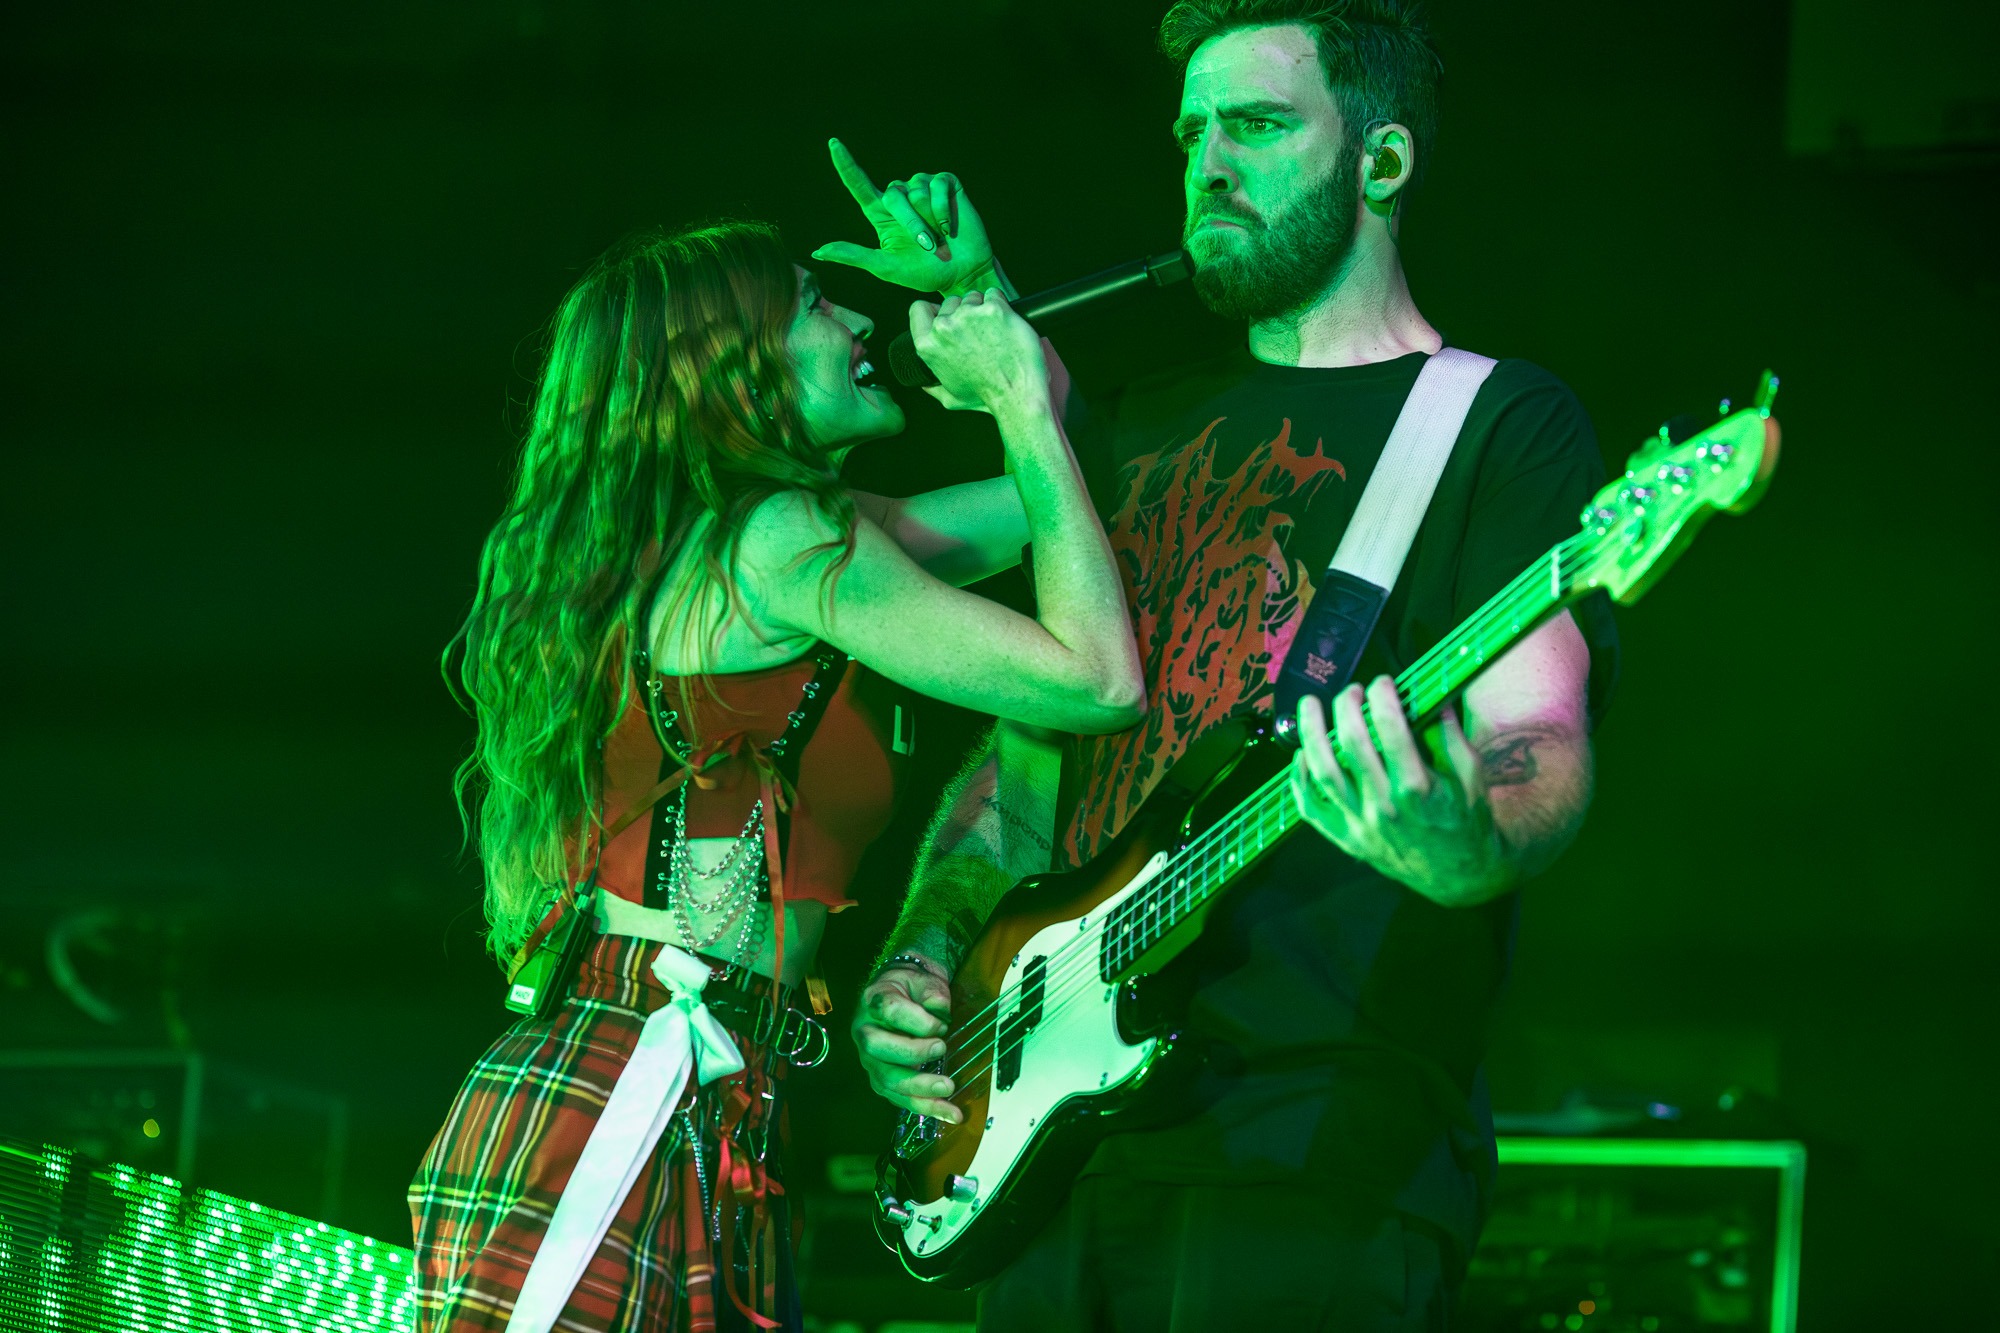 Mandy Leed of MisterWives singing to guitarist